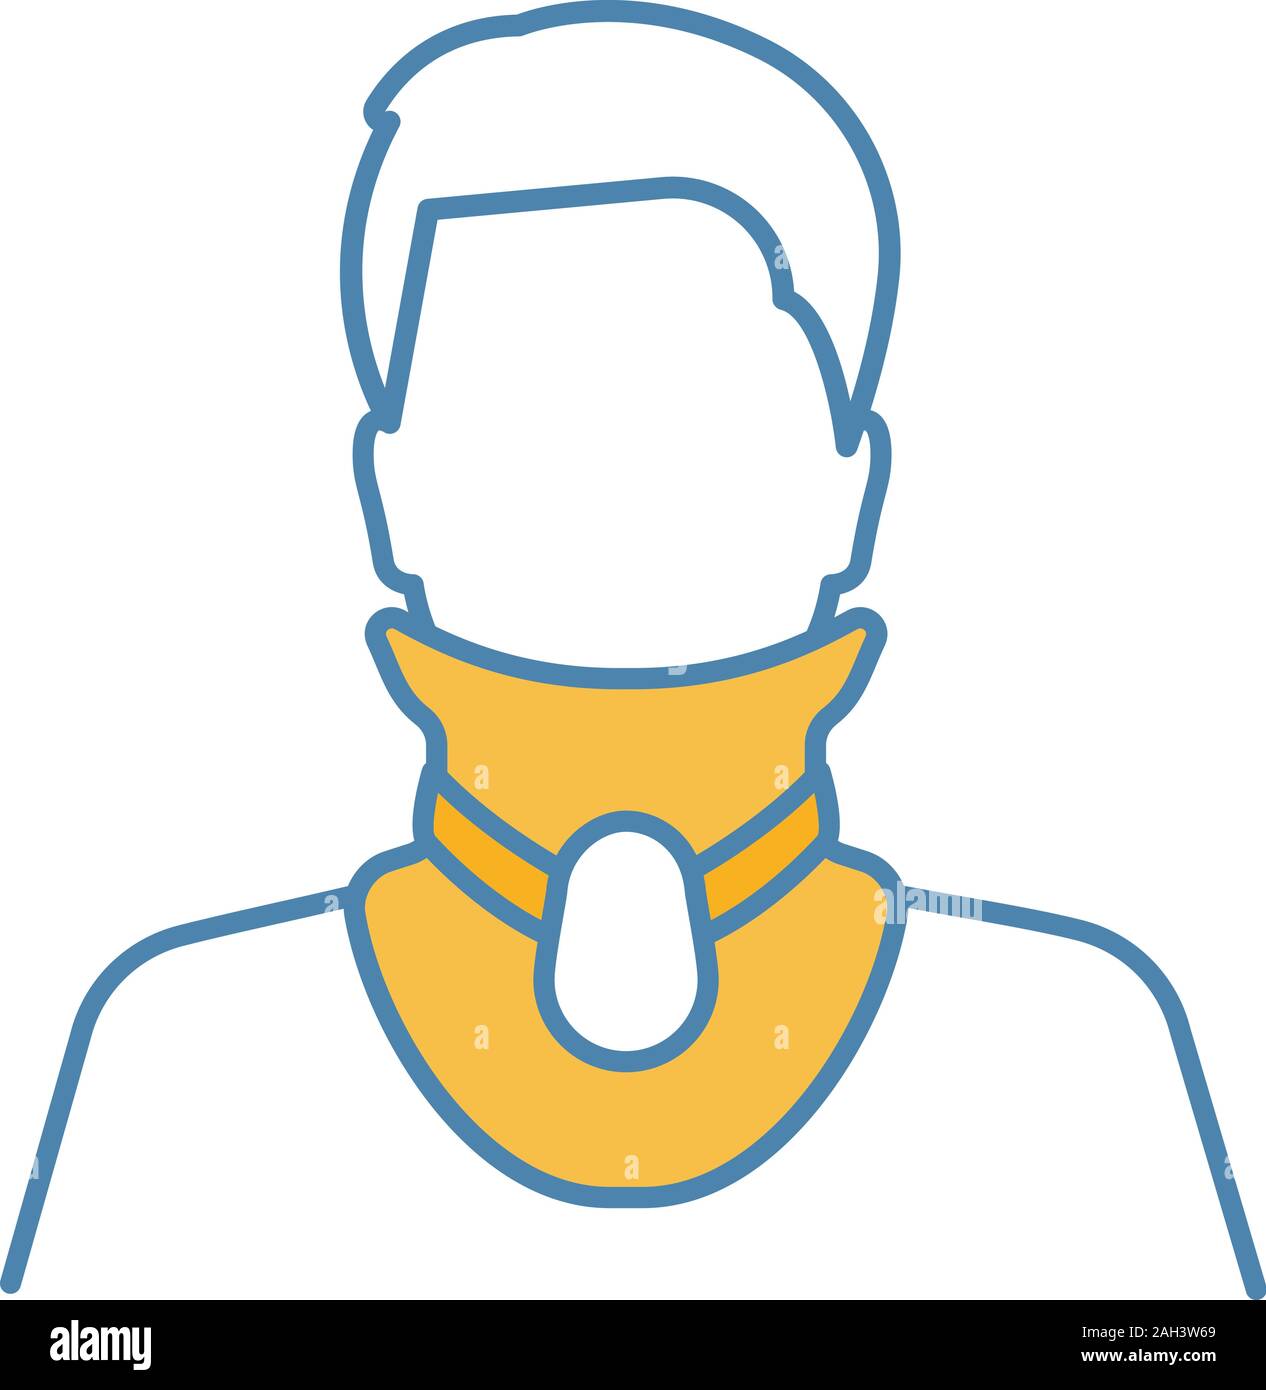 Cervical collar color icon. Neck brace. Medical foam neck support. Orthopedic collar. Cervical spine stabilization. Traumatic head and neck injuries t Stock Vector